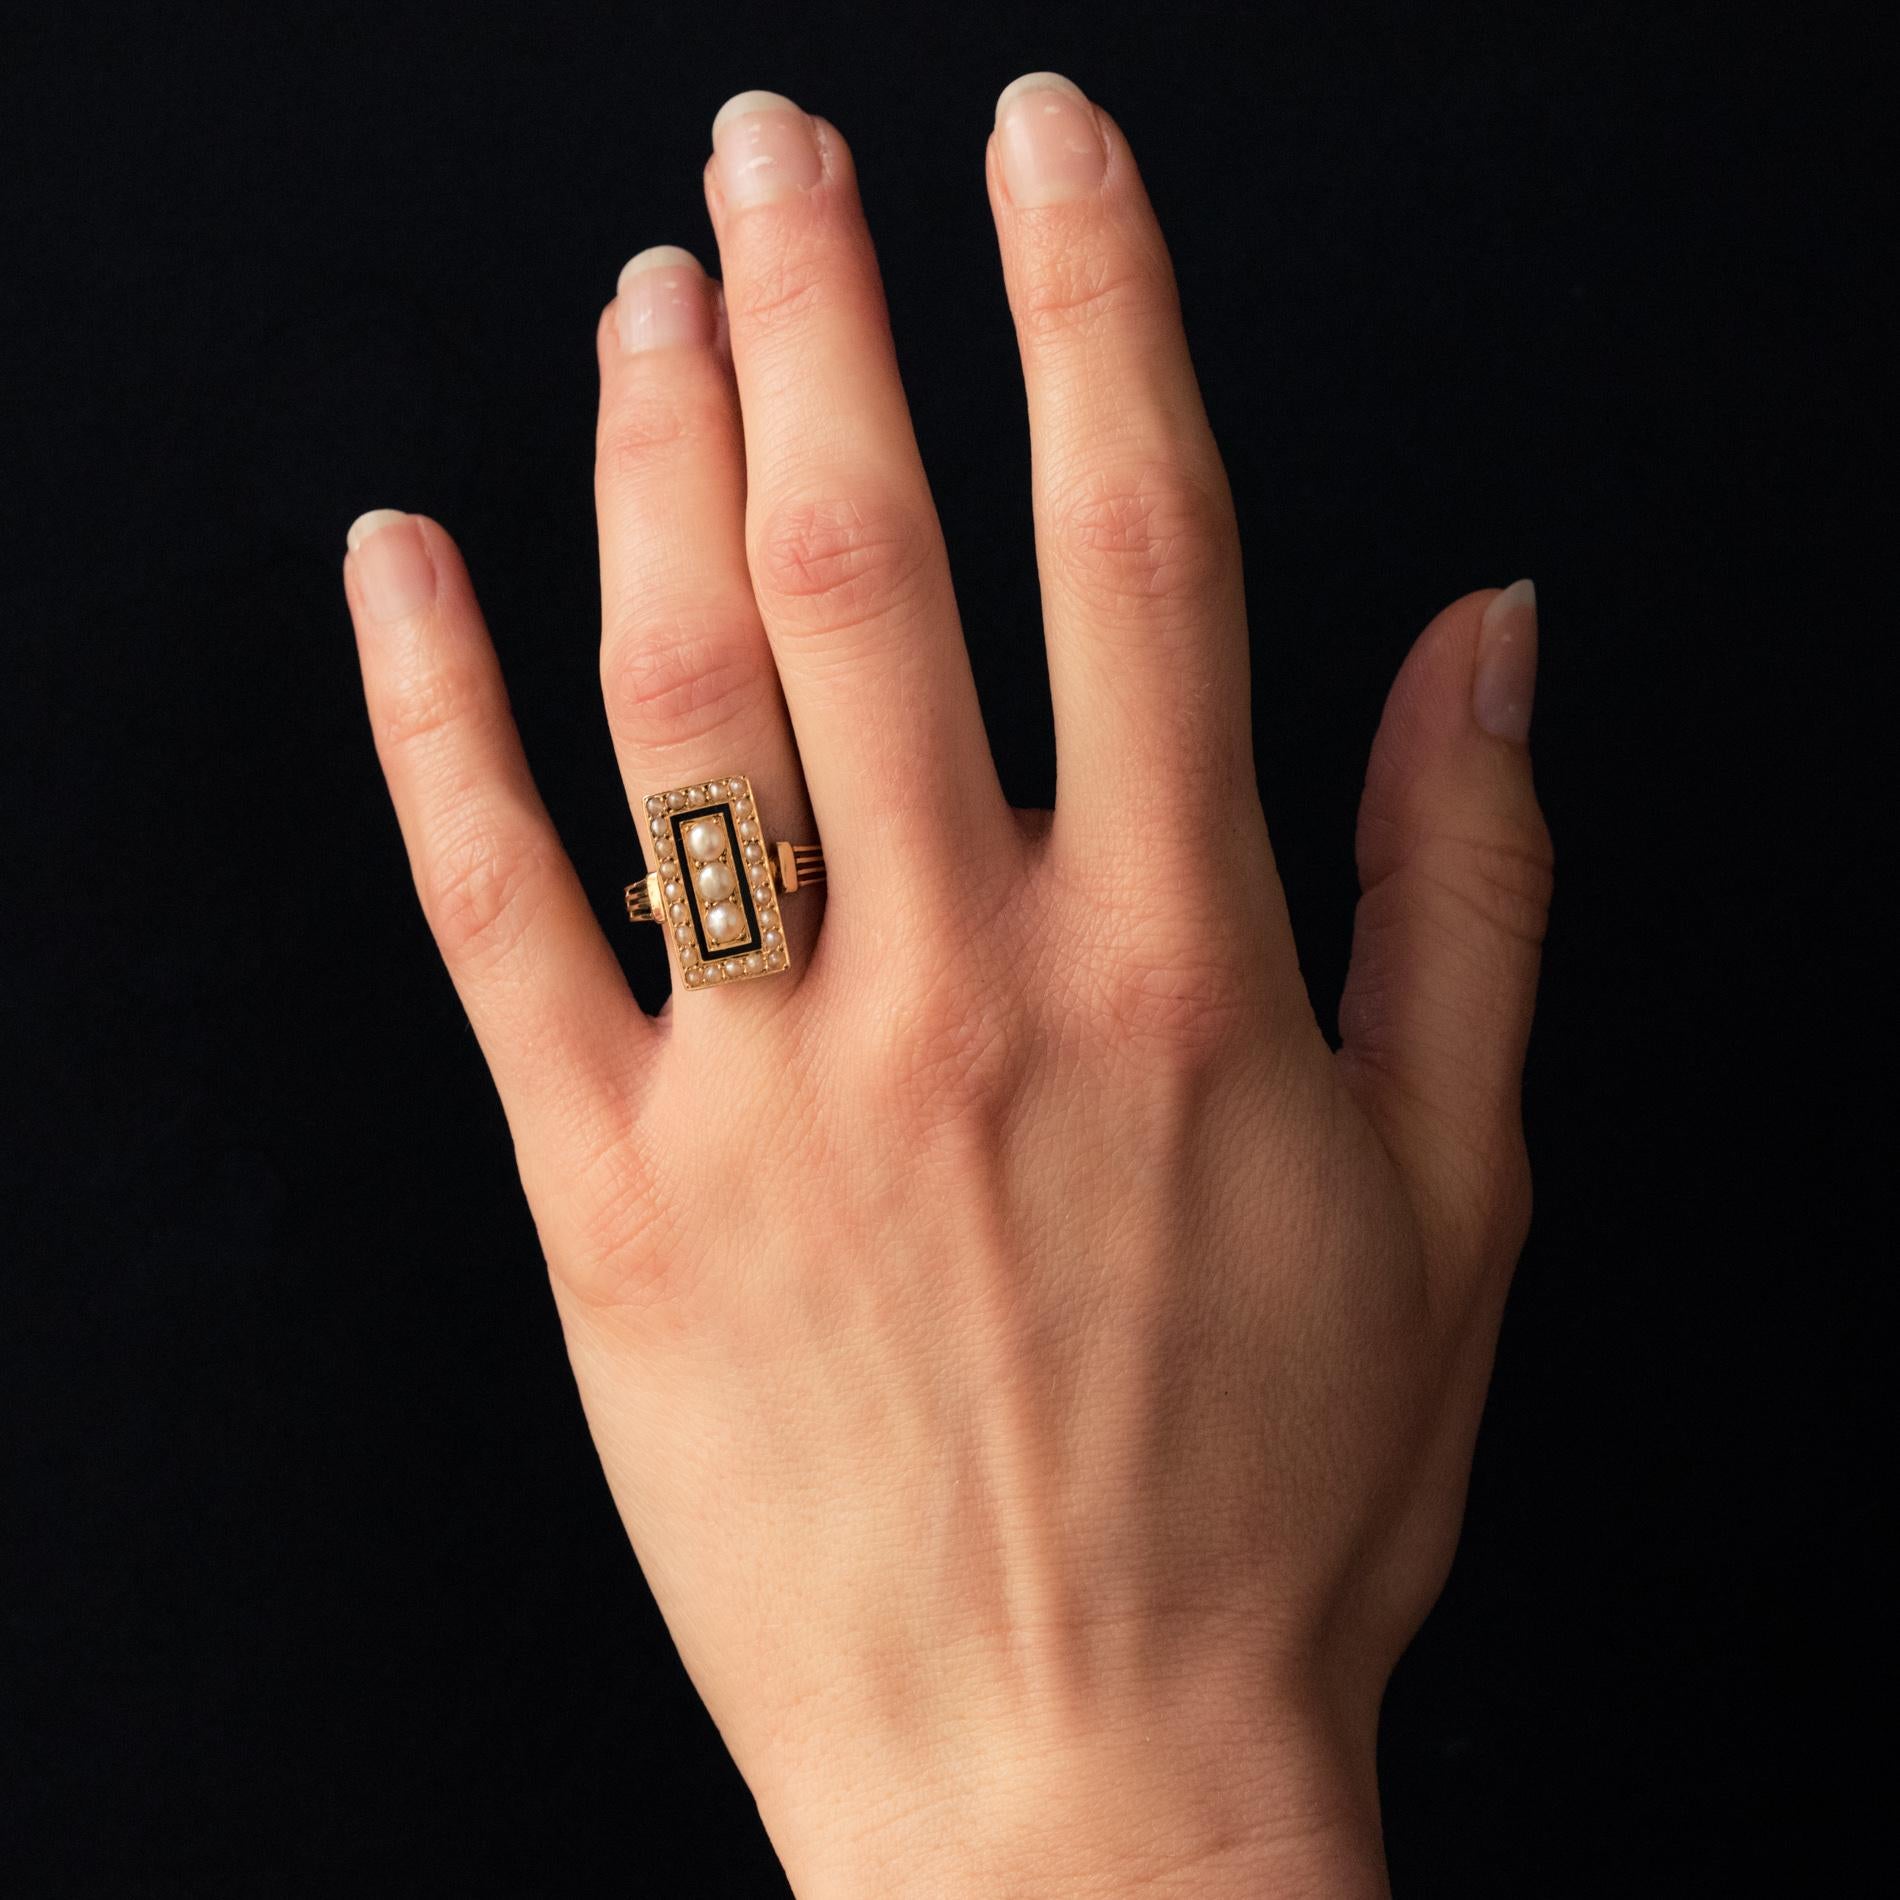 Ring in 18 karat yellow gold, owl hallmark.
Charming antique ring, it consists of a rectangular shaped setting set with half natural pearls. The natural pearls in the center are larger and surrounded by a streak of black enamel. The ring consists of